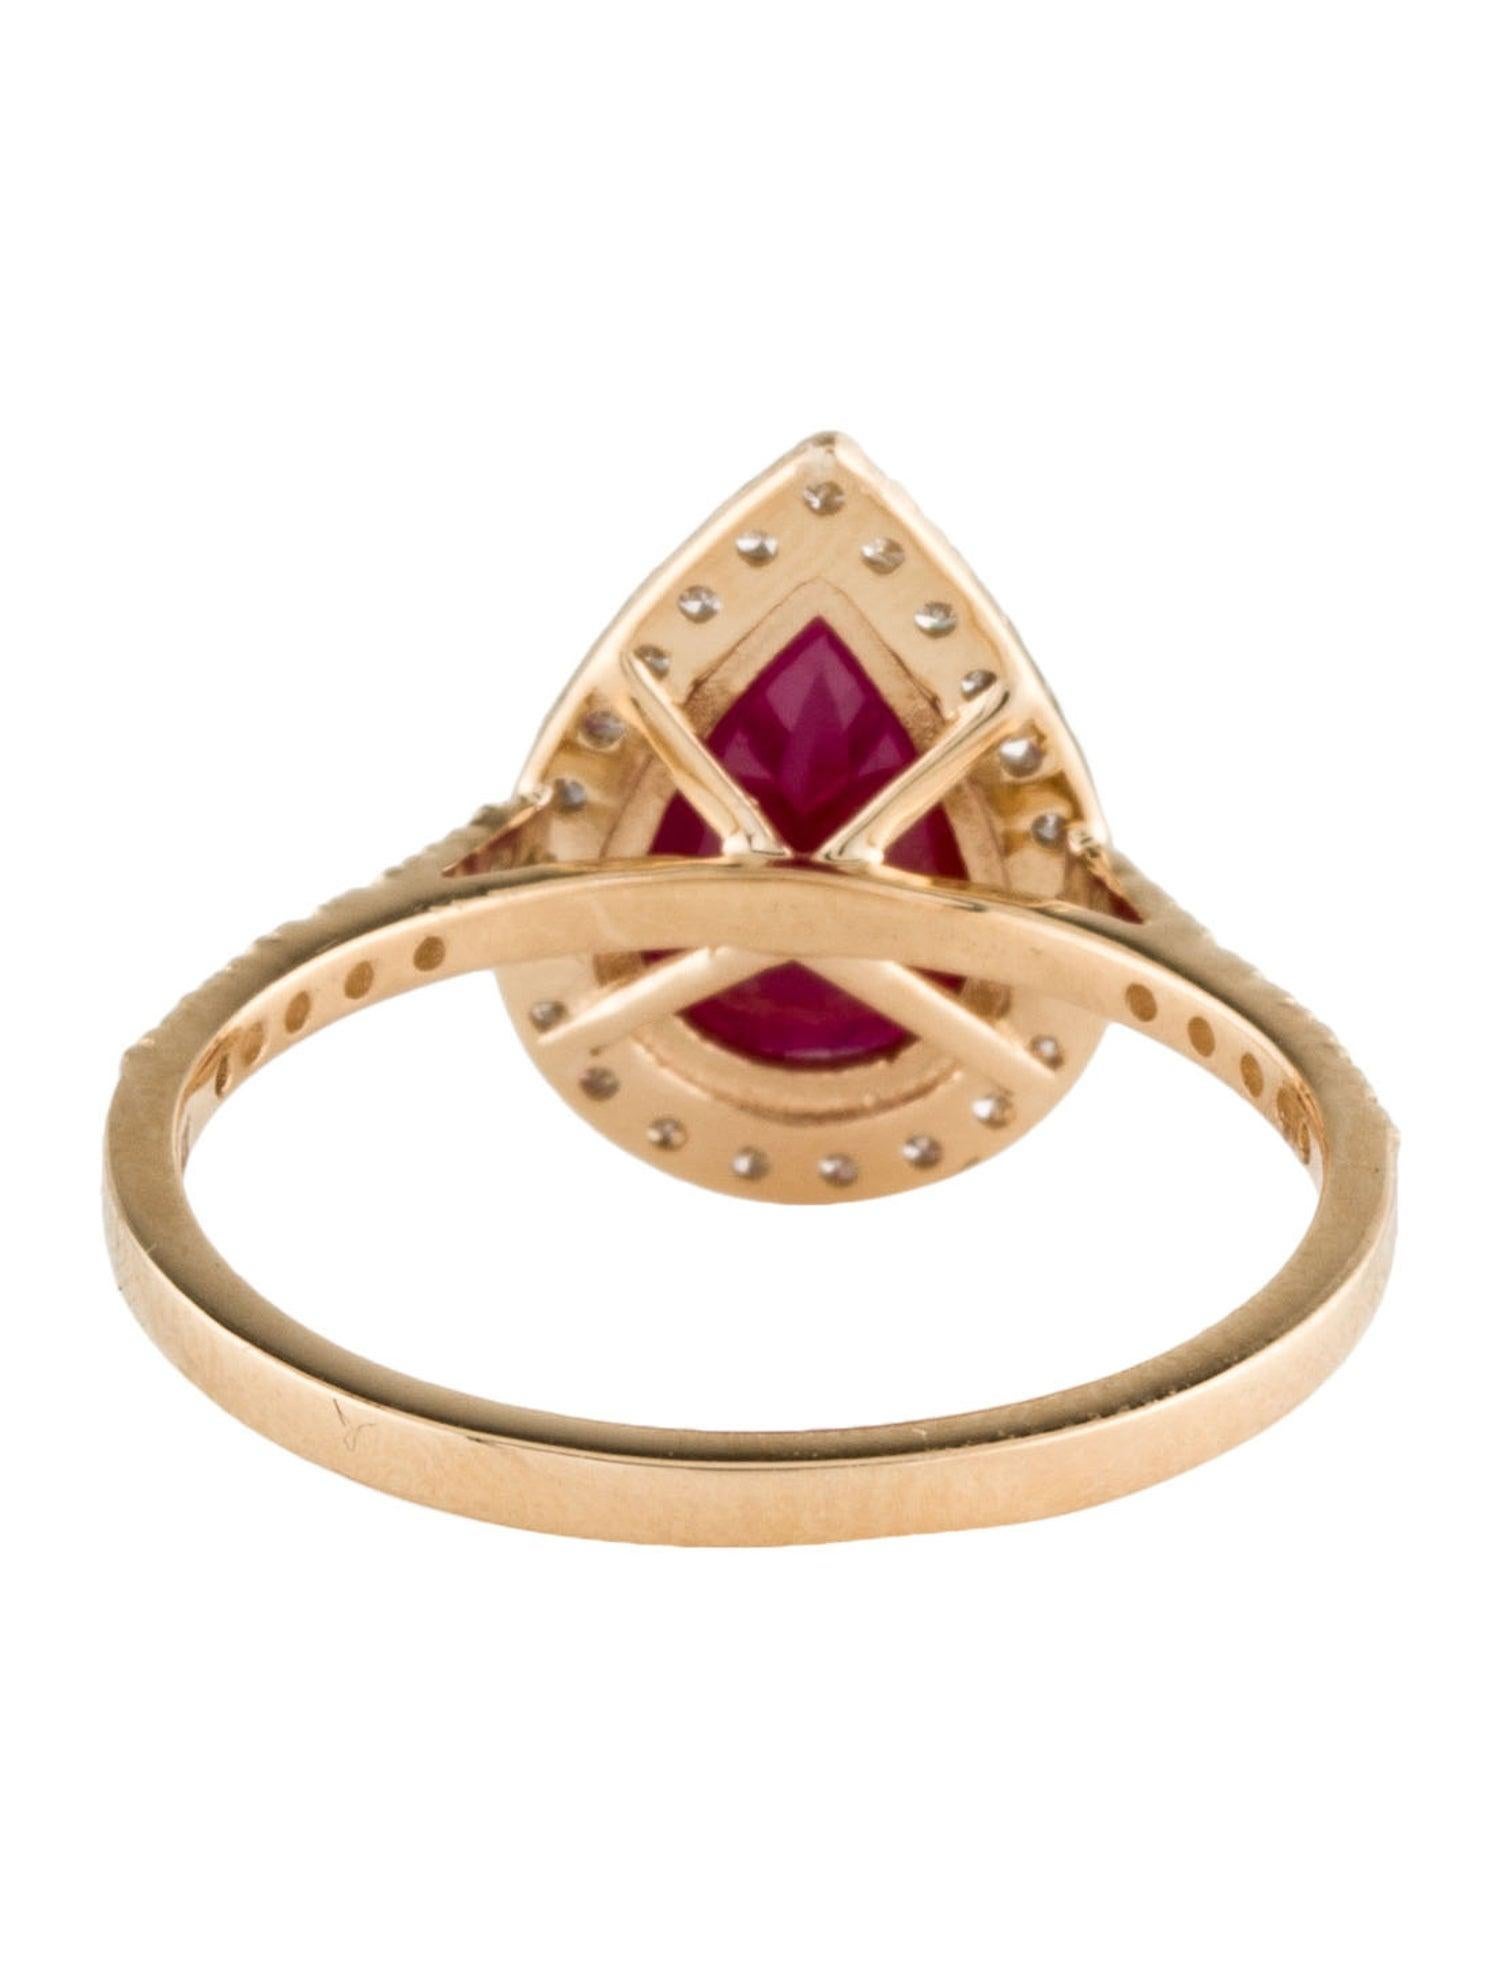 Brilliant Cut Luxury 14K Ruby & Diamond Cocktail Ring 1.58ctw - Size 6.75 - Timeless & Elegant For Sale